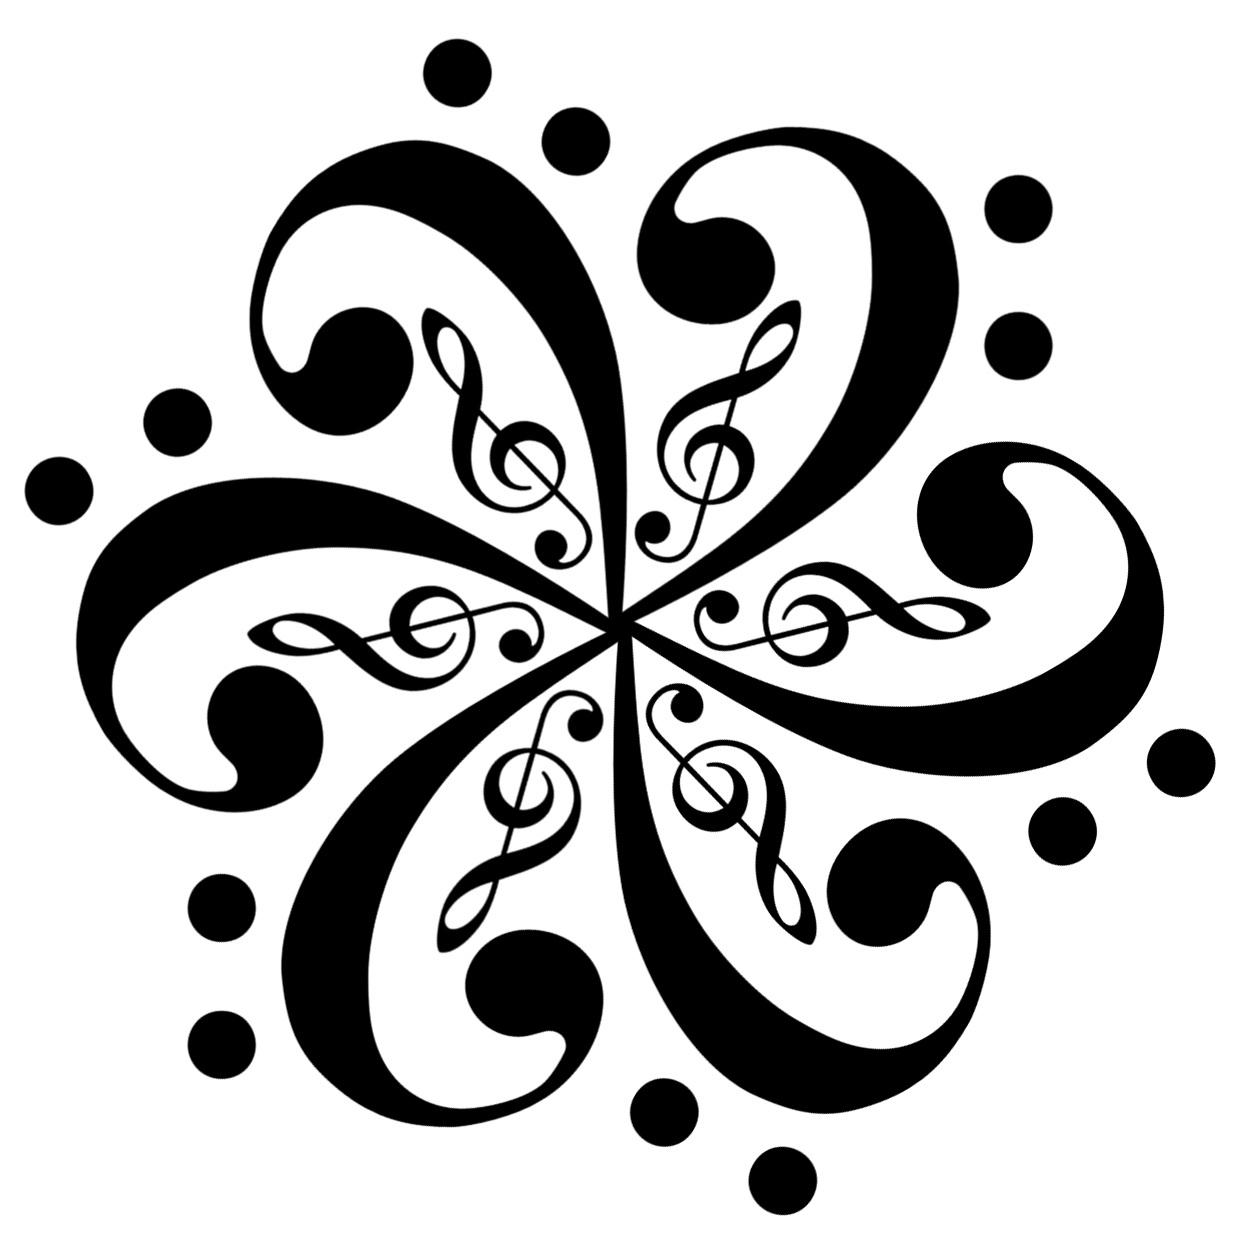 Music note coloring page - Coloring Pages  Pictures - IMAGIXS